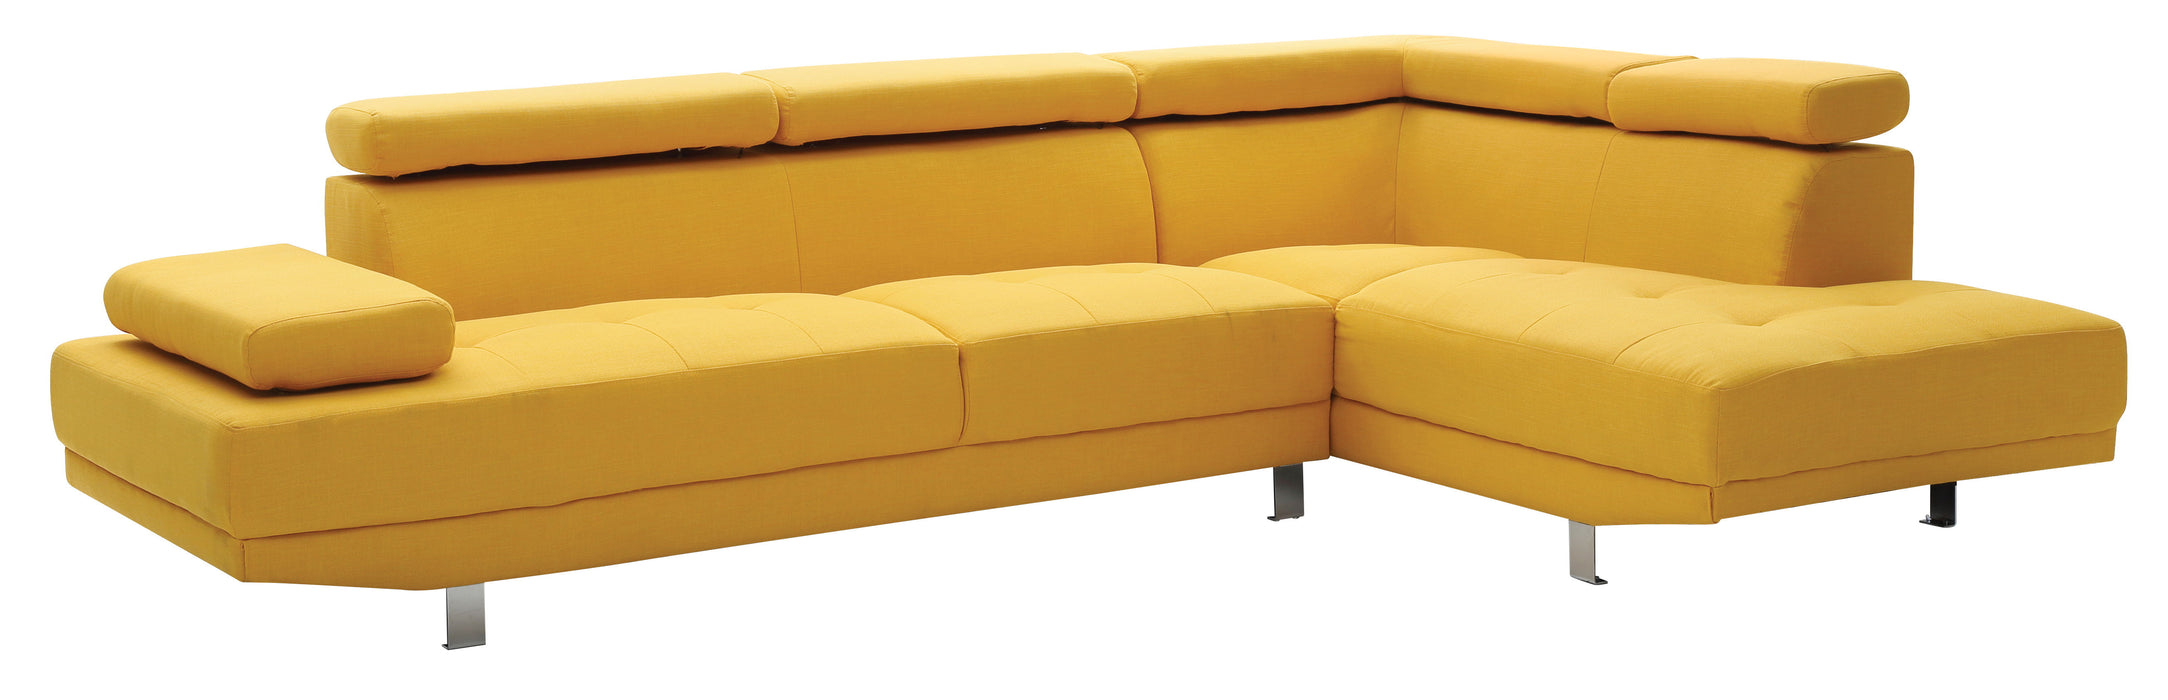 Riveredge - G446-SC Sectional (2 Boxes) - Yellow